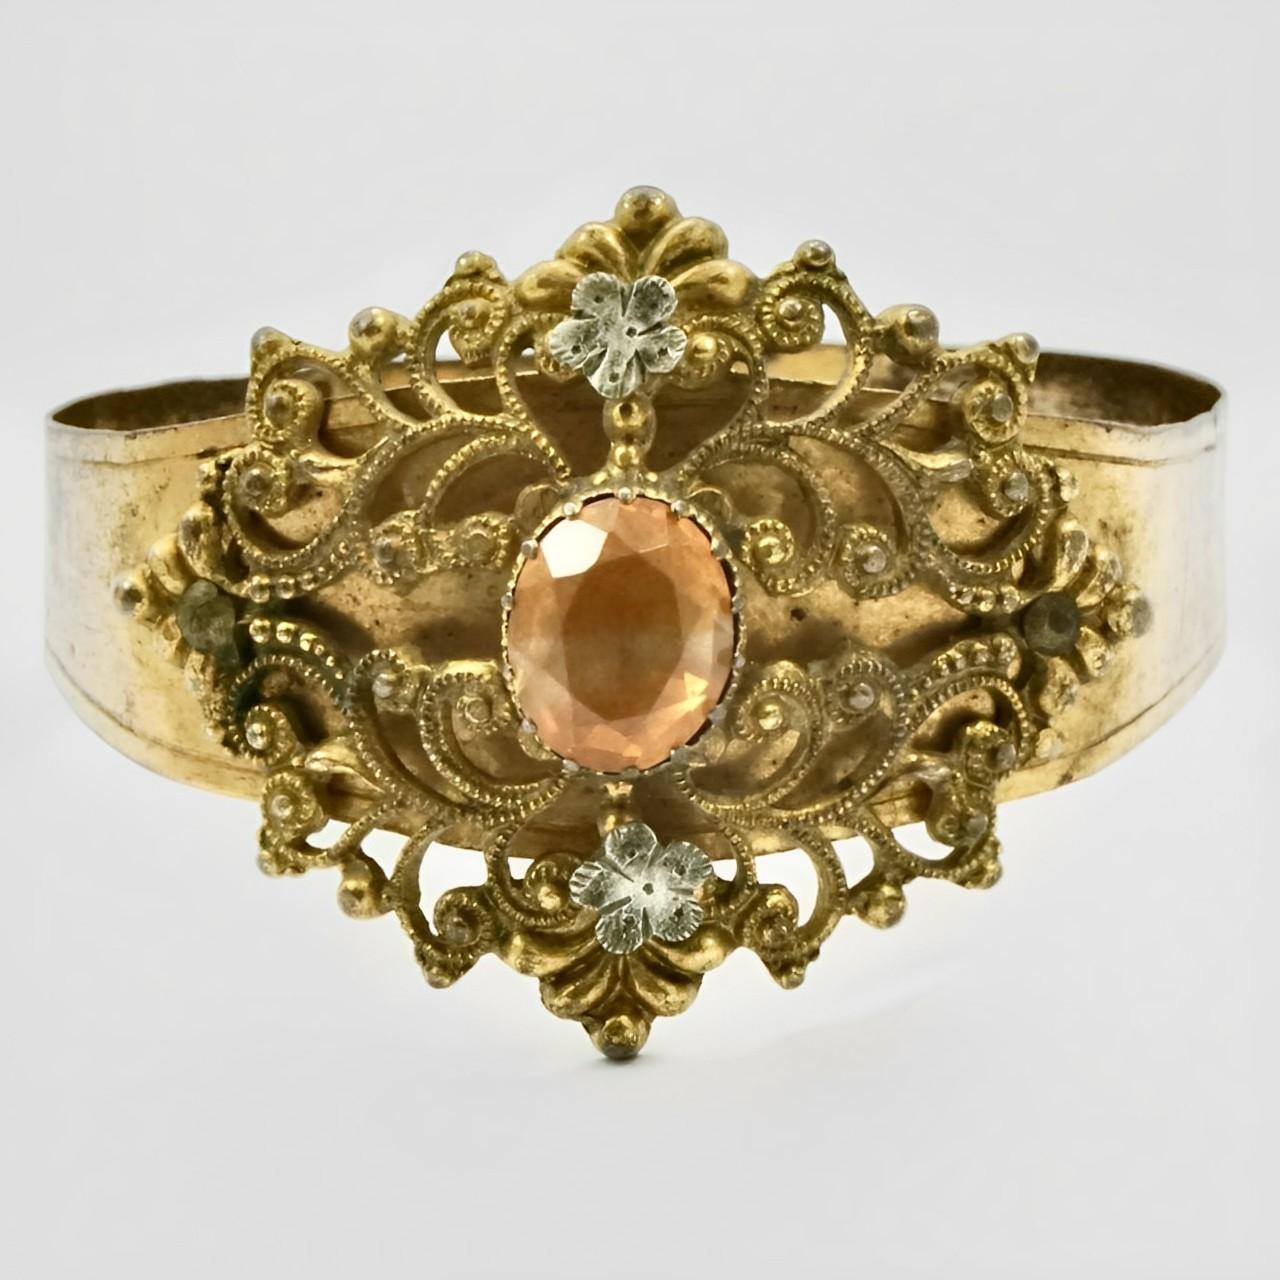 Beautiful Art Deco gold plated filigree bangle bracelet, set with an amber paste stone and two silver tone flowers. The bangle is adjustable, measuring inside diameter approximately width 5.7 cm / 2.24 inches to 6.1 cm / 2.4 inches. The width at the